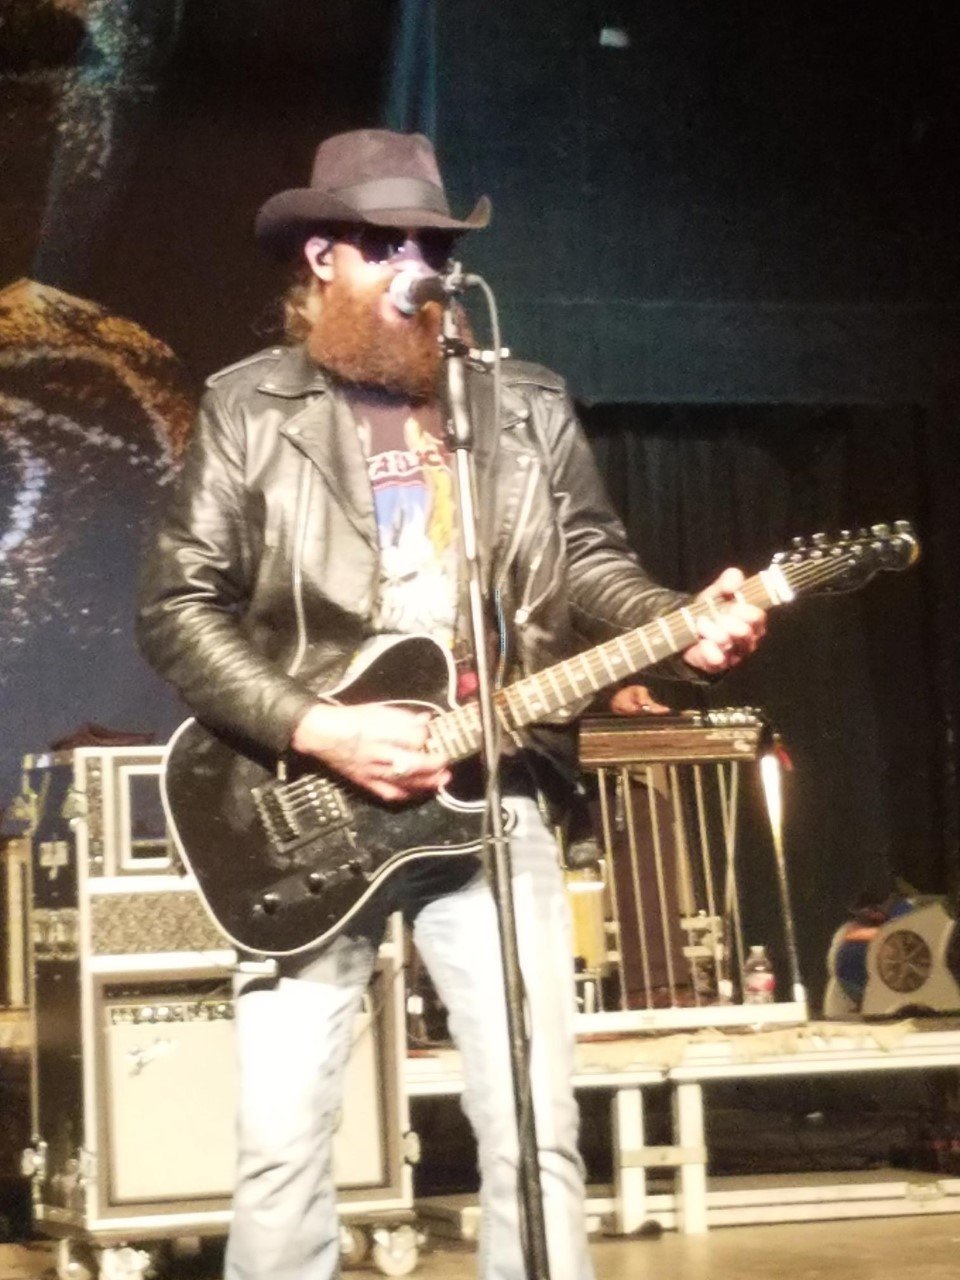 Cody Jinks rocked the Concrete Street Amphitheater in Corpus Christi last Friday. Jinks closed the encore with Must Be The Whiskey, leaving the crowd happy that night.